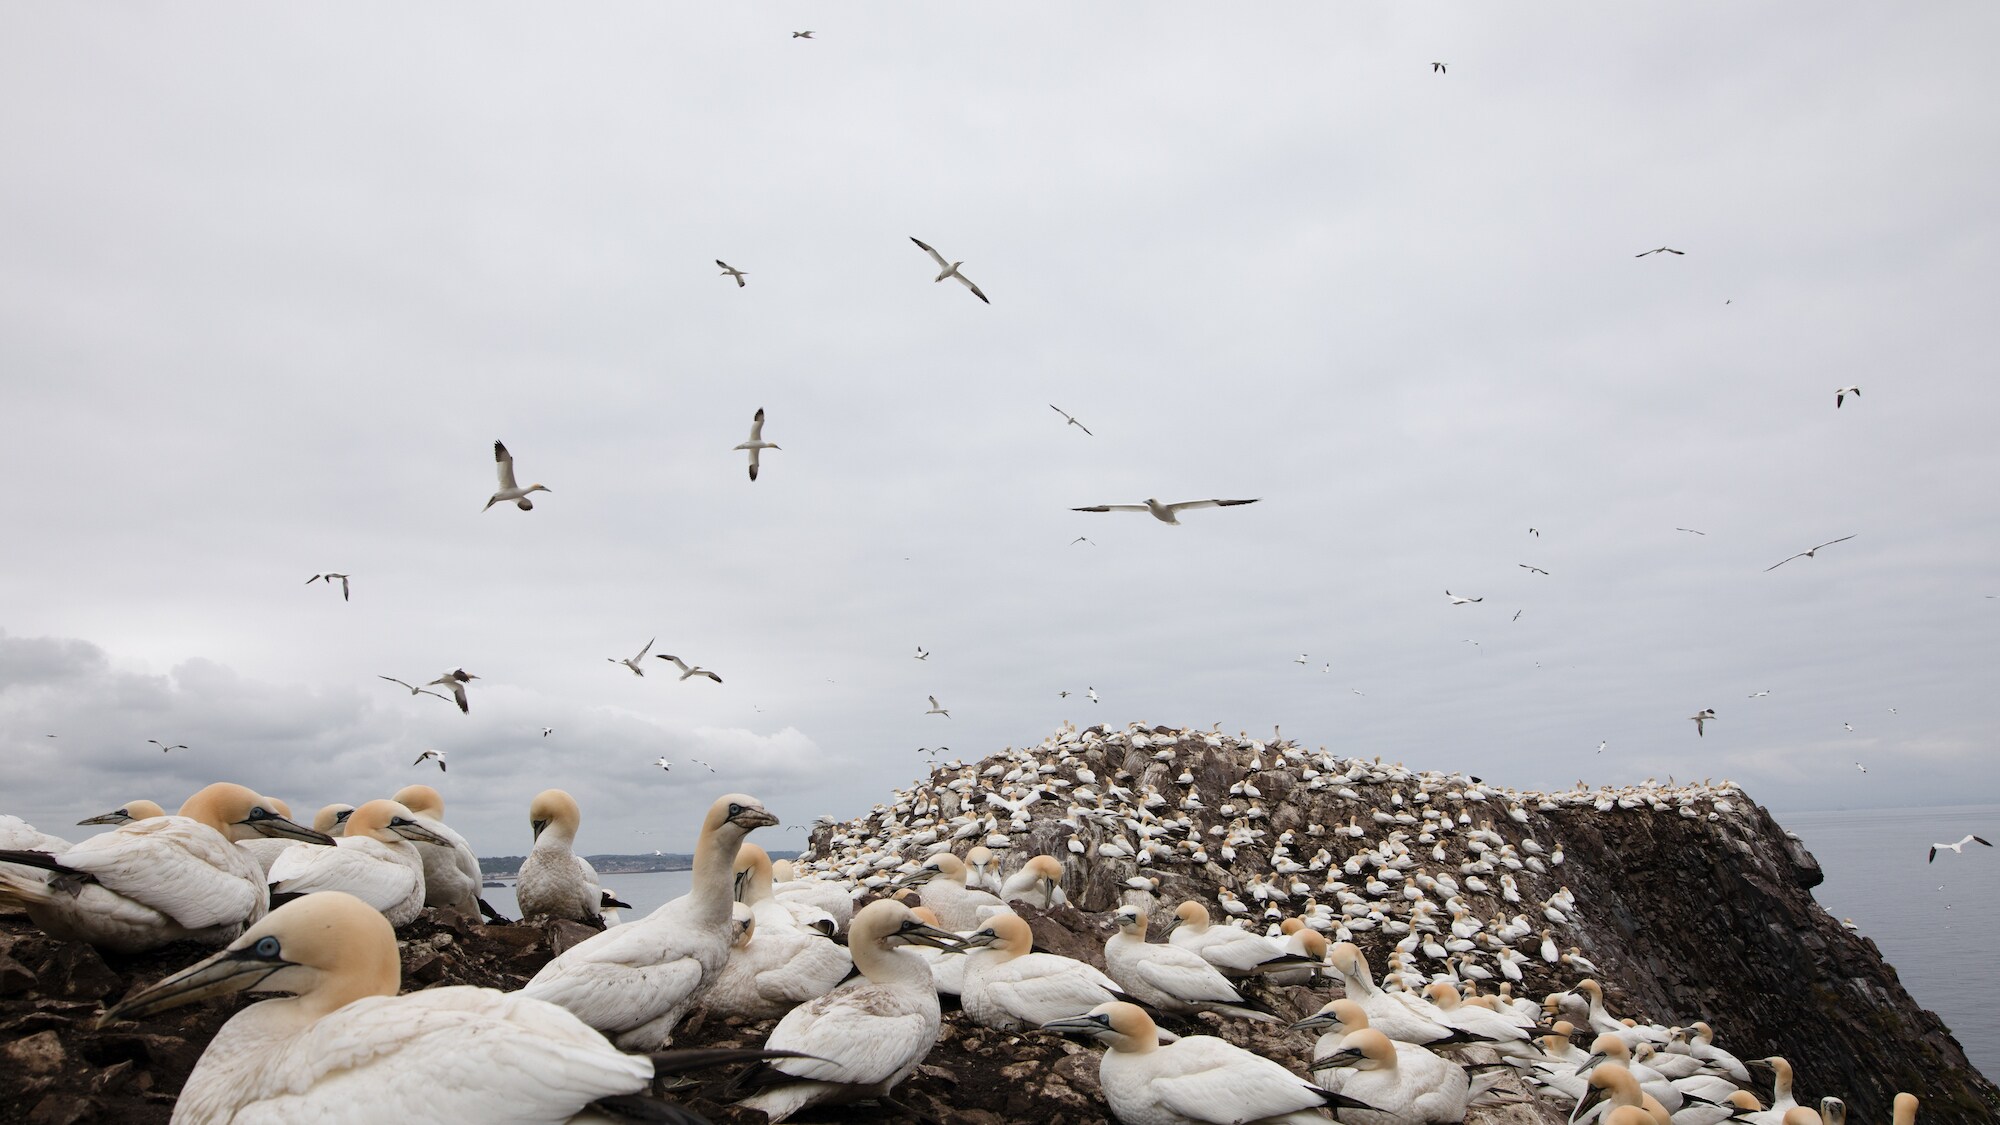 Northern gannets take flight over colony on Bass Rock.  (National Geographic for Disney+/Eloisa Noble)